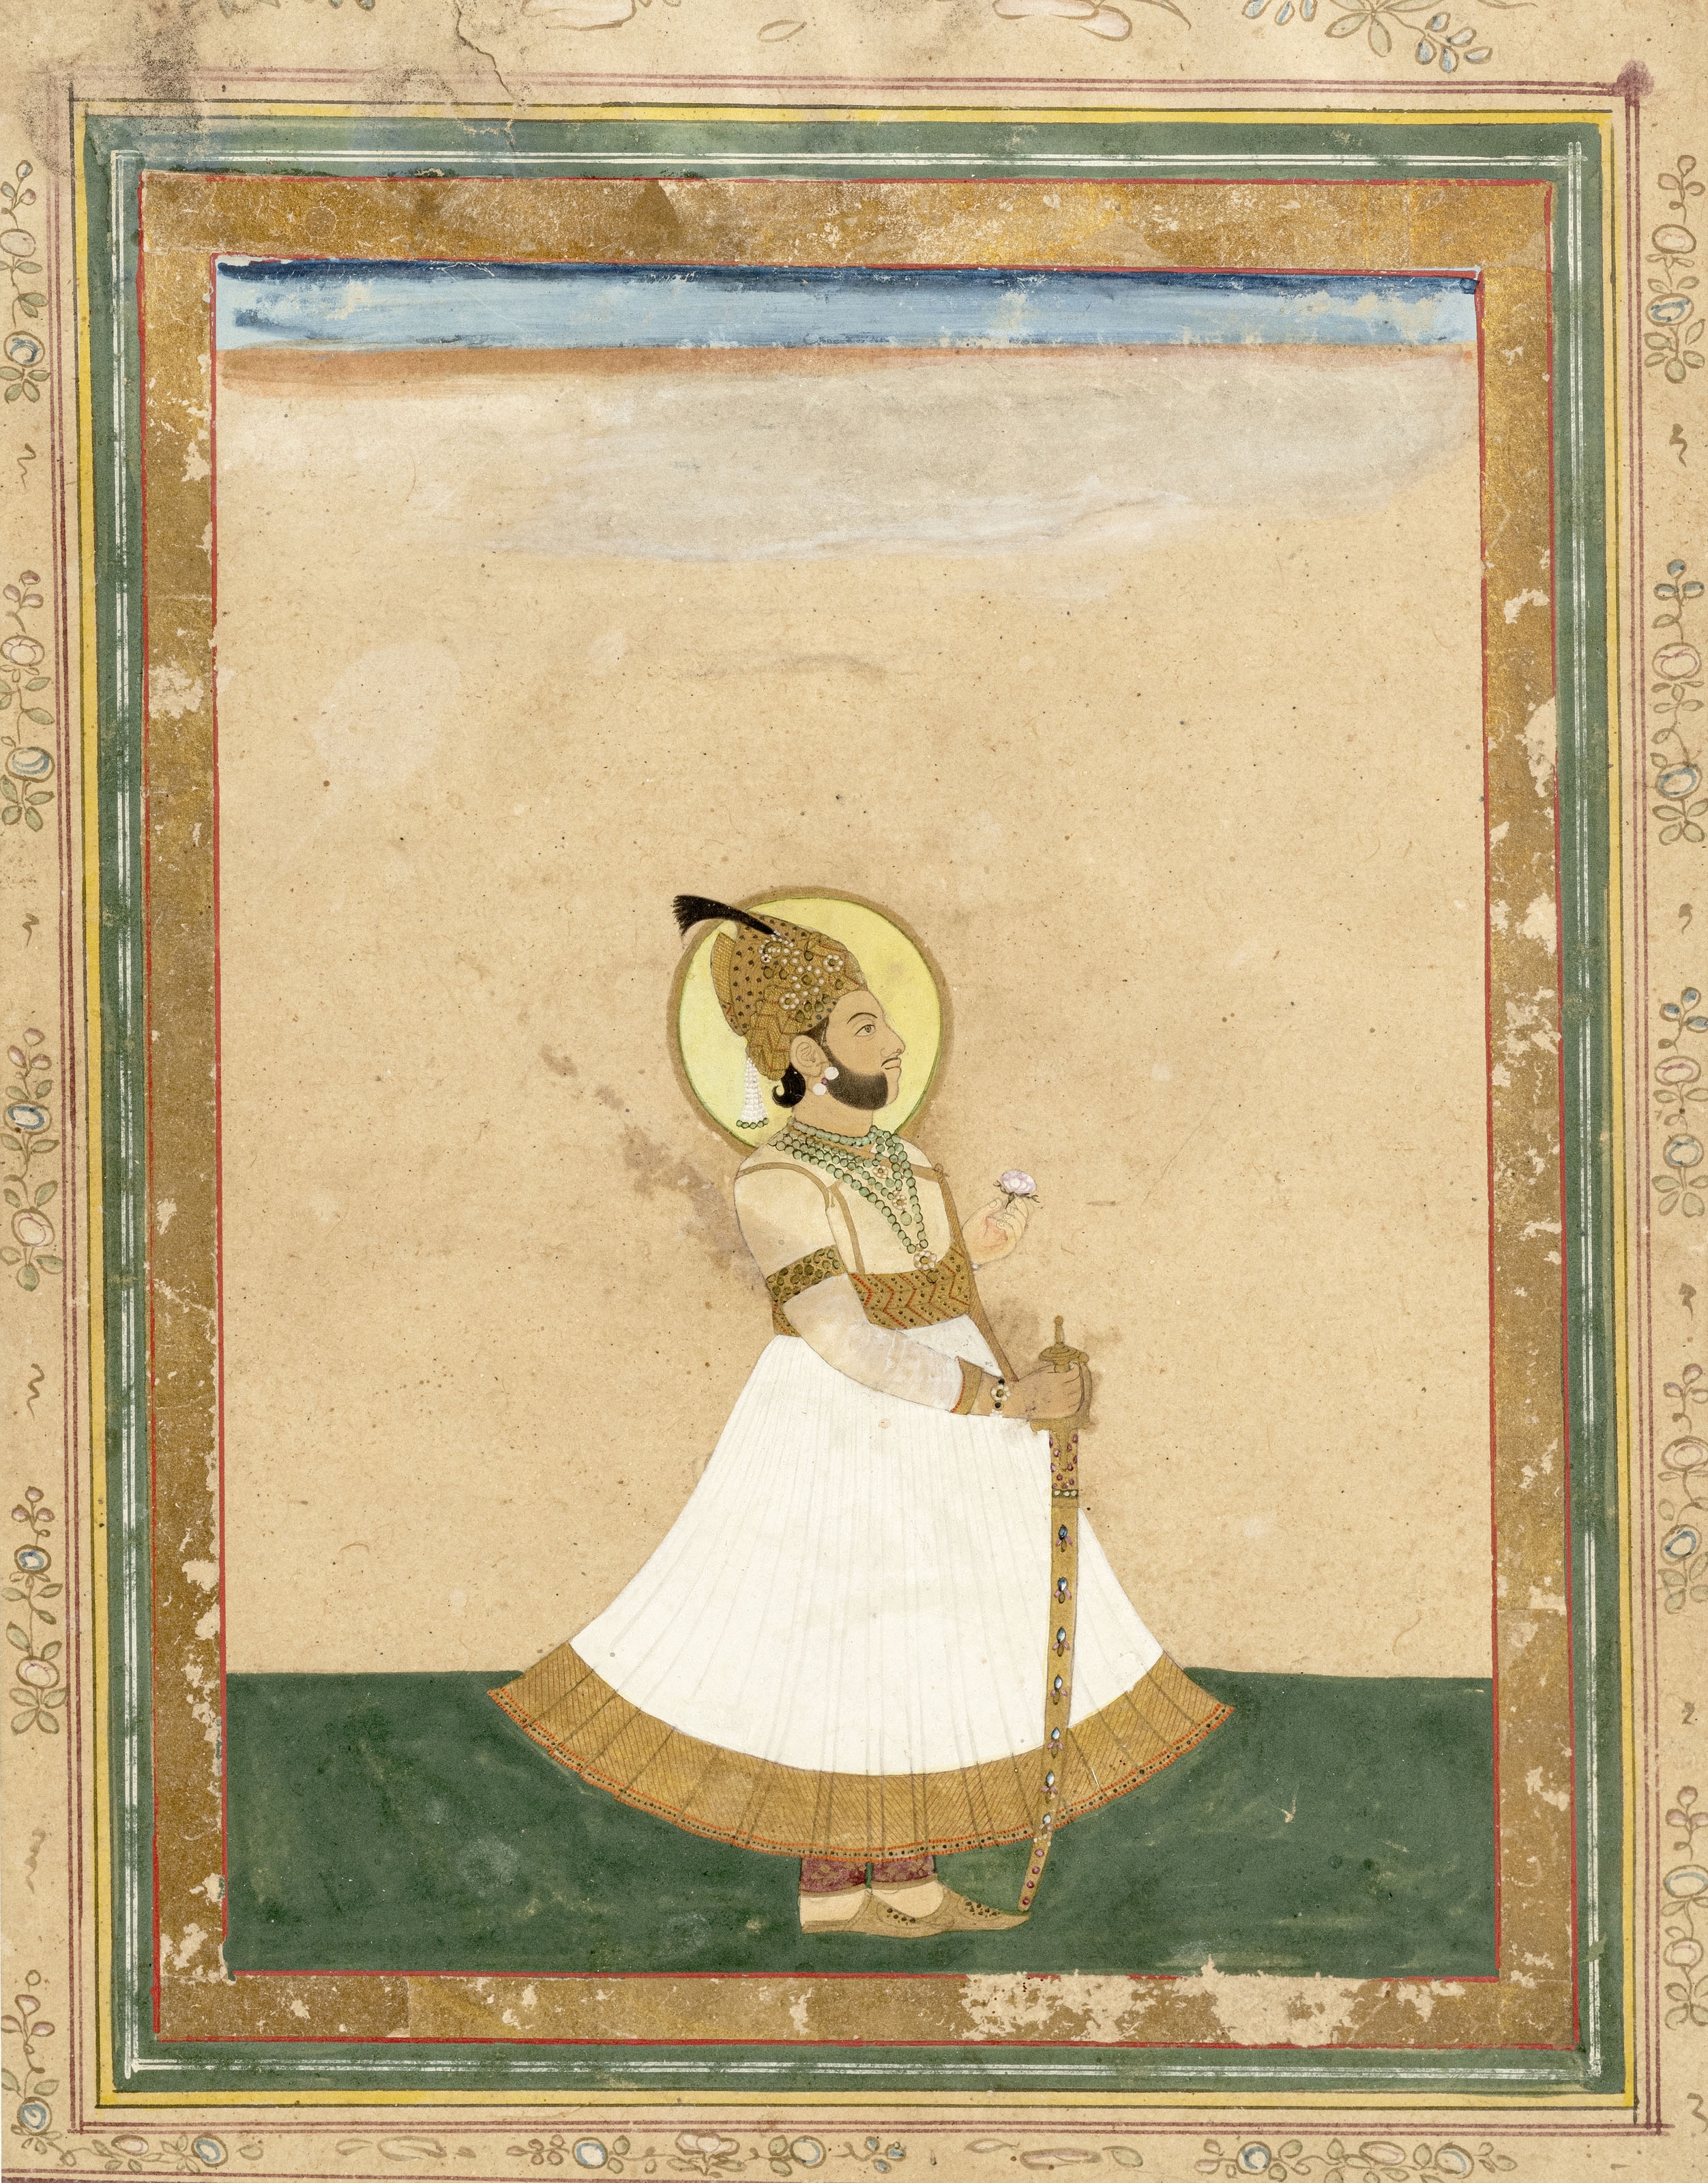 Portrait probably of Jaga Singh of Amber and Jaipur (r. 1803-1818) by Indian School, 19th Century, ca 1805